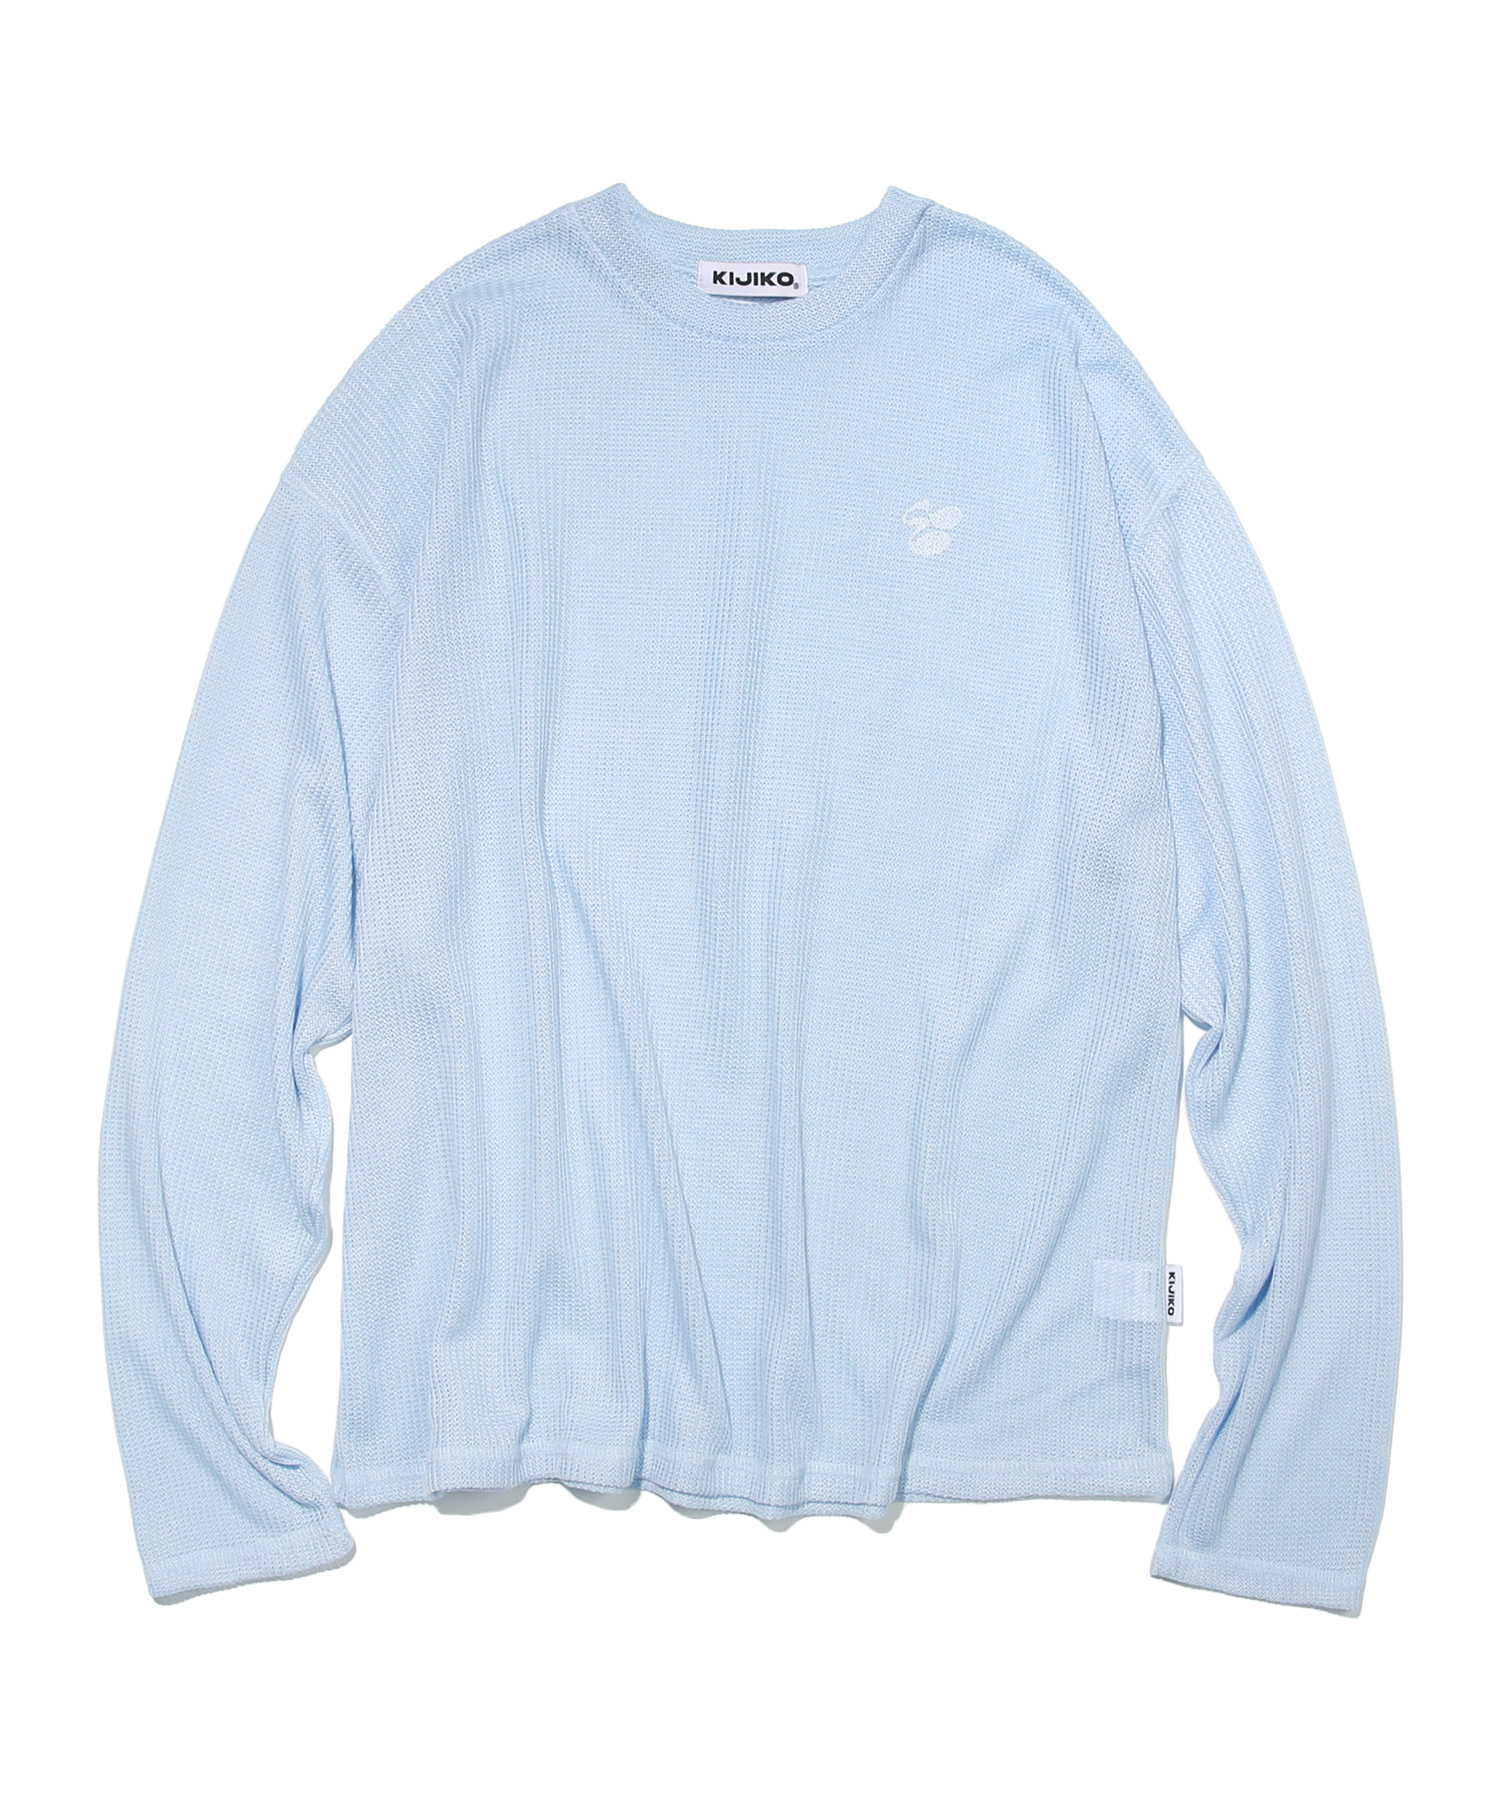 Hippie knit long sleeves  SkyBlue